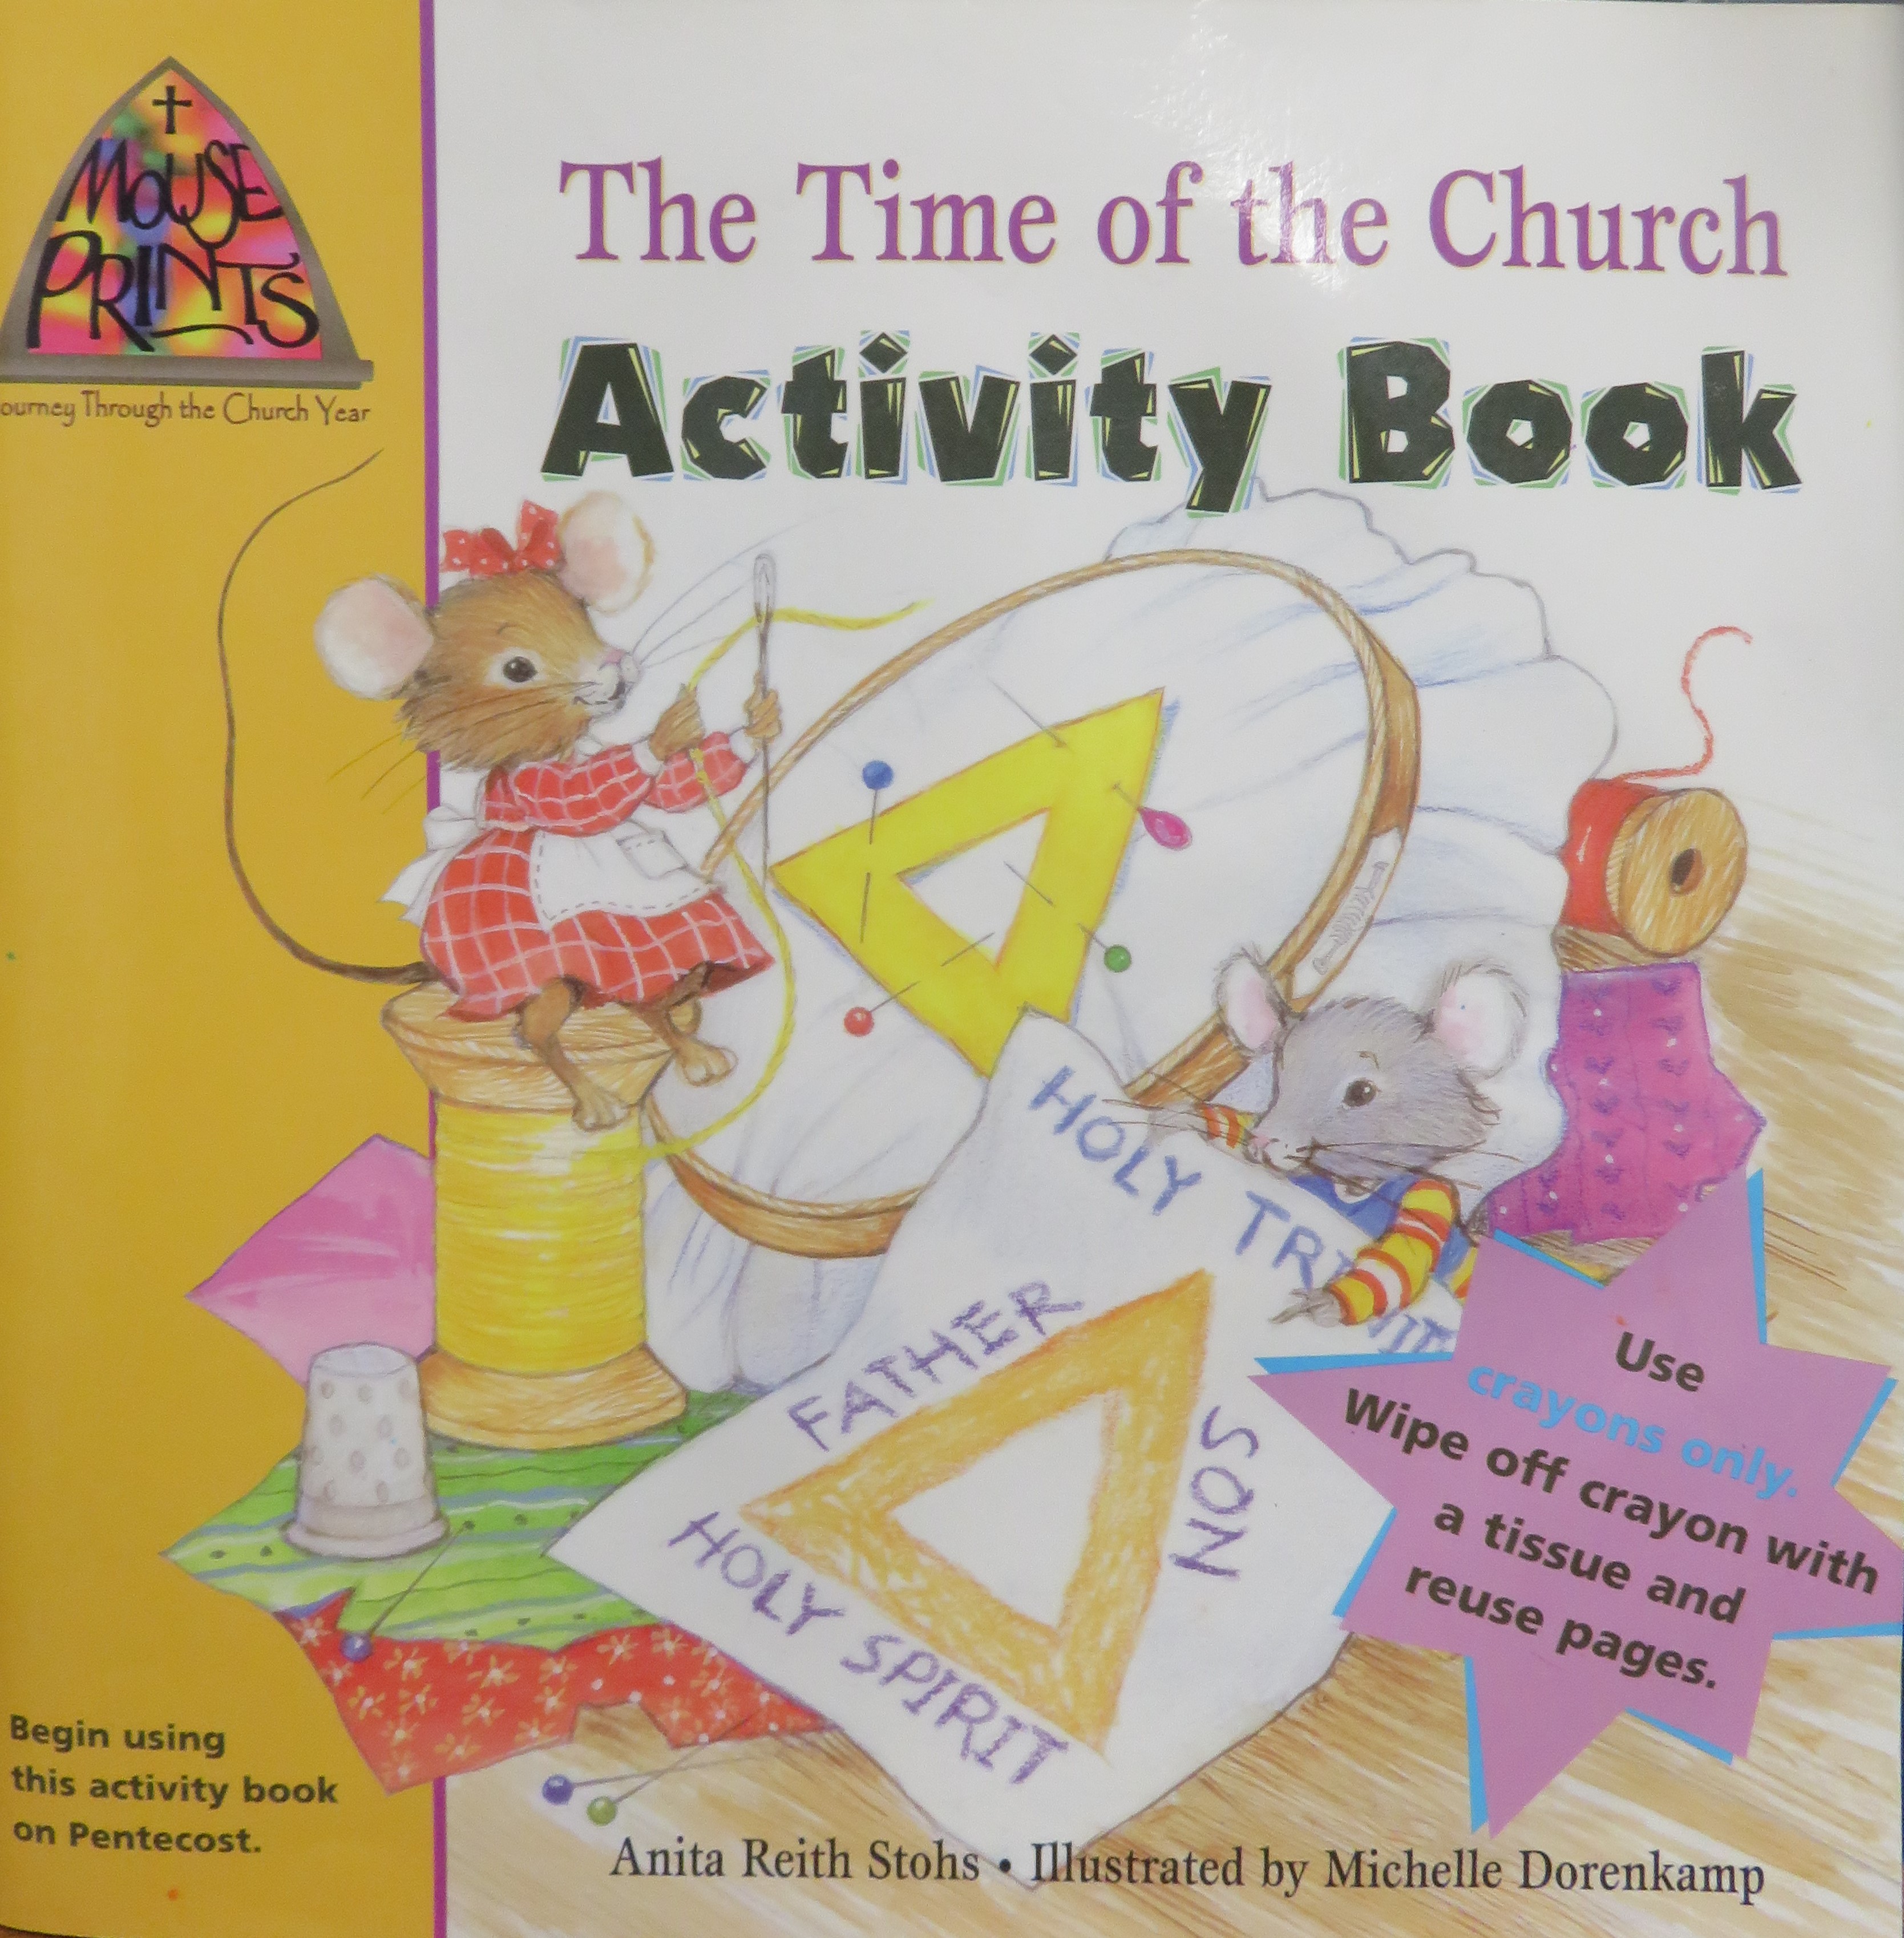 The Time of the Church Activity Book